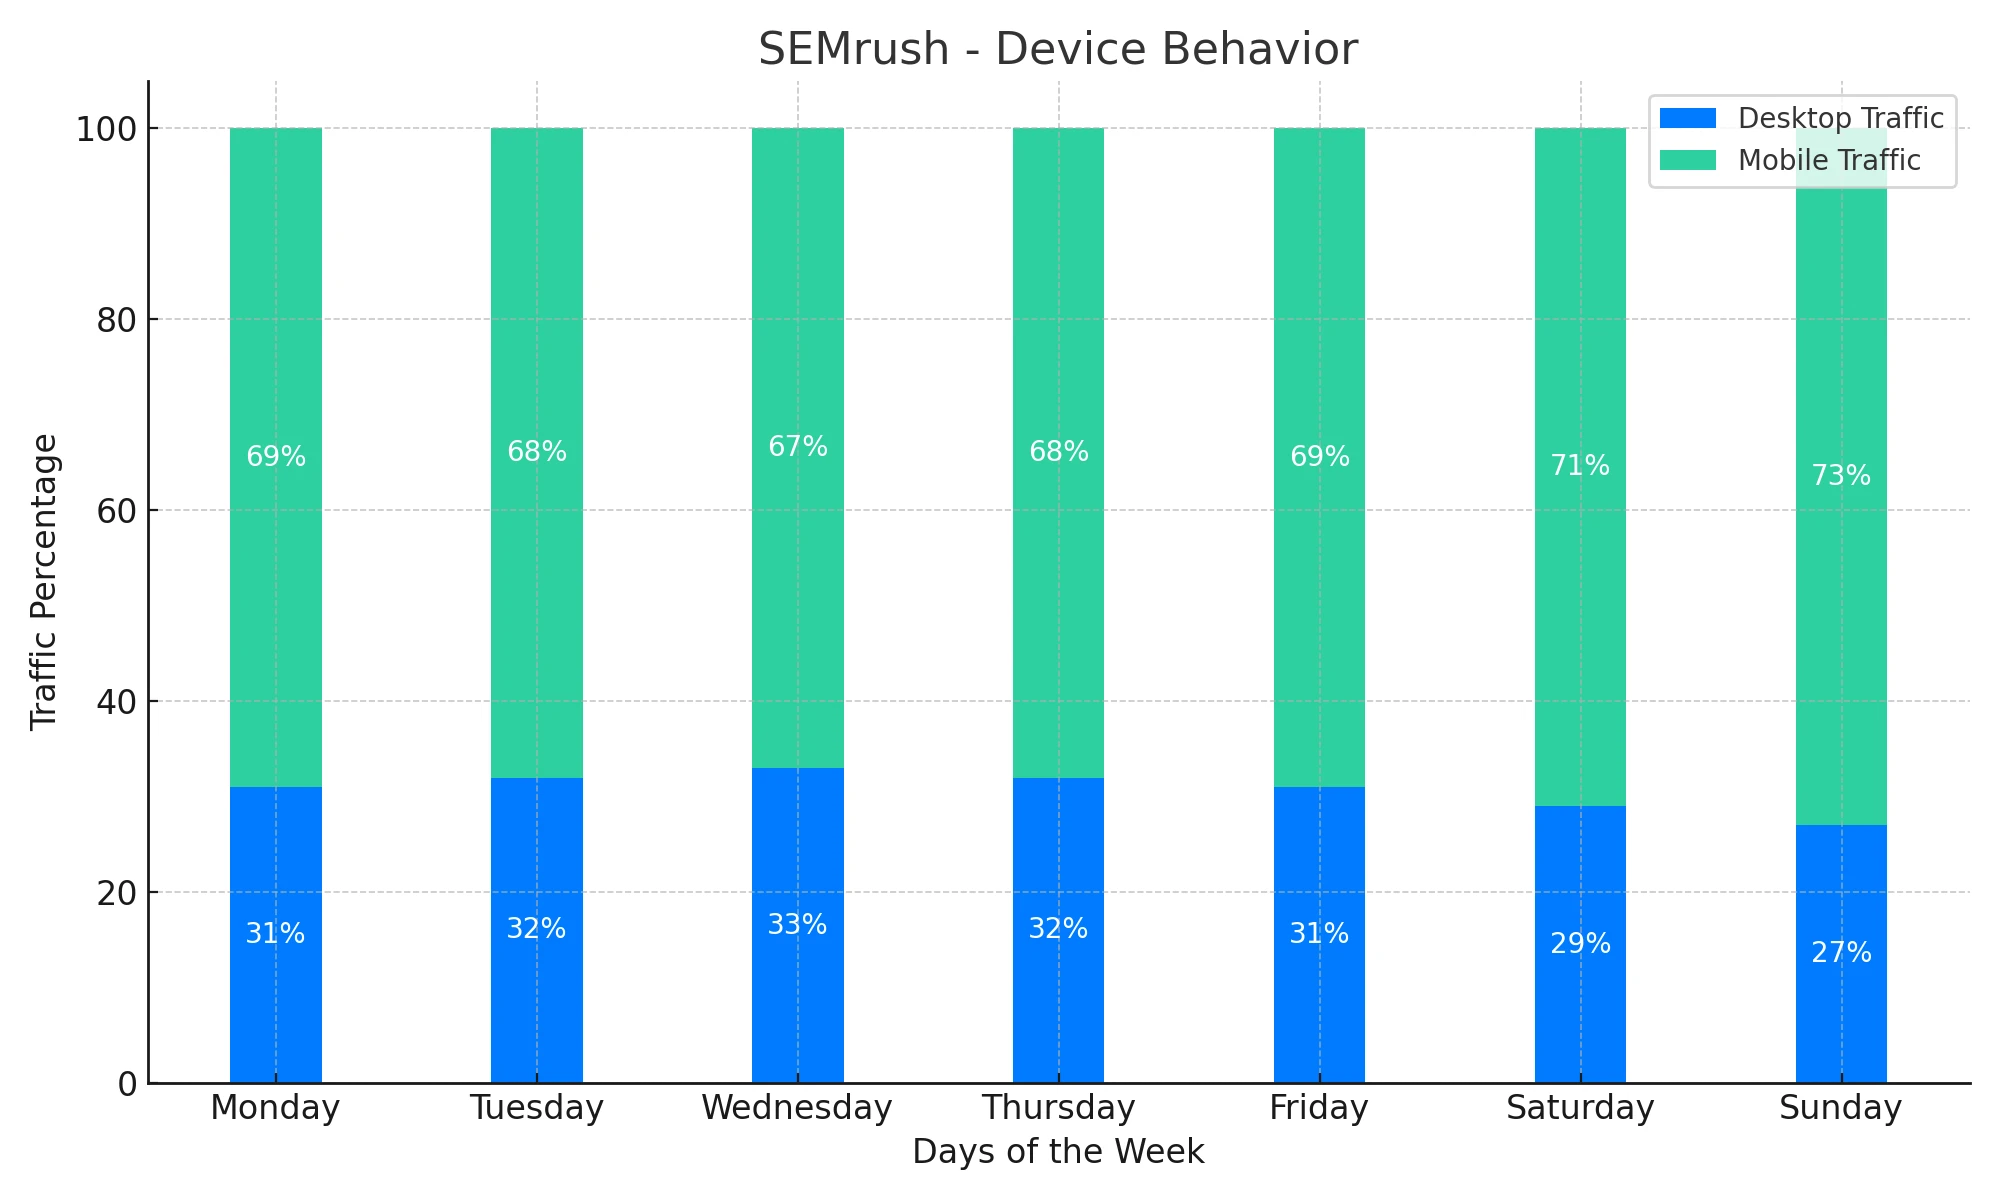 Bar chart illustrating the percentage of desktop and mobile traffic for each day of the week according to SEMrush data. Desktop traffic is depicted in blue, and mobile traffic is in green.